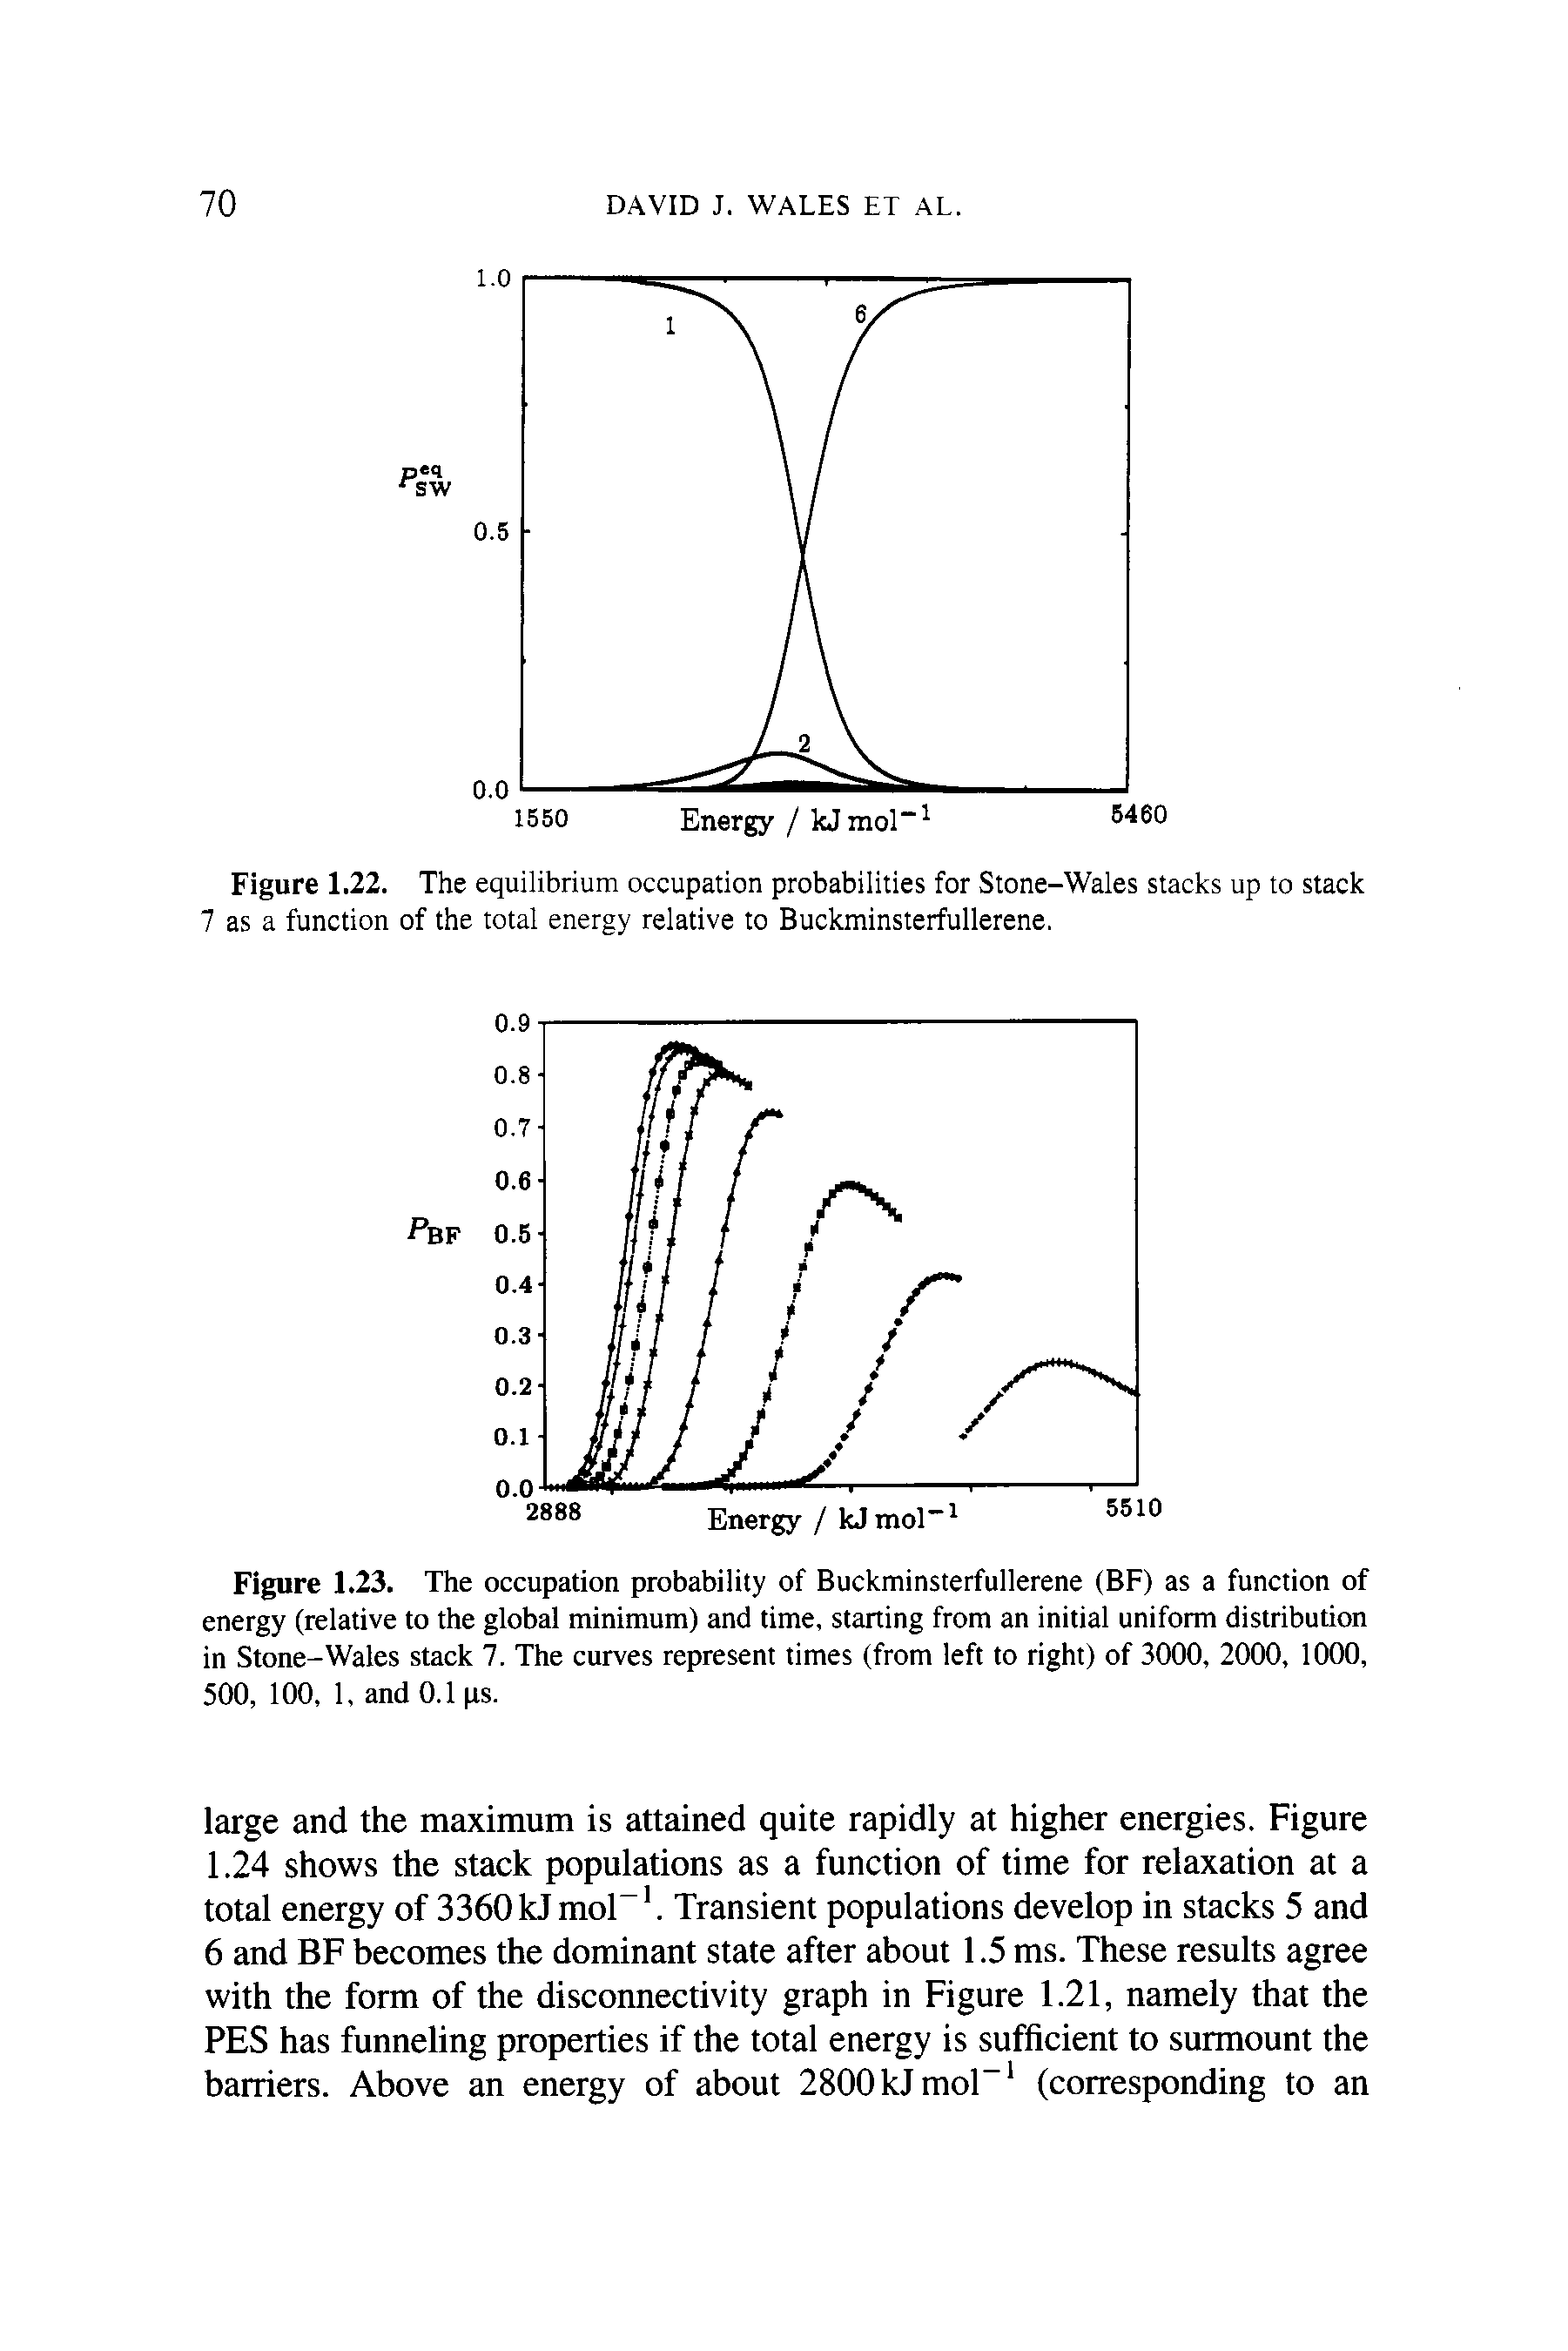 Figure 1.22. The equilibrium occupation probabilities for Stone-Wales stacks up to stack 7 as a function of the total energy relative to Buckminsterfullerene.